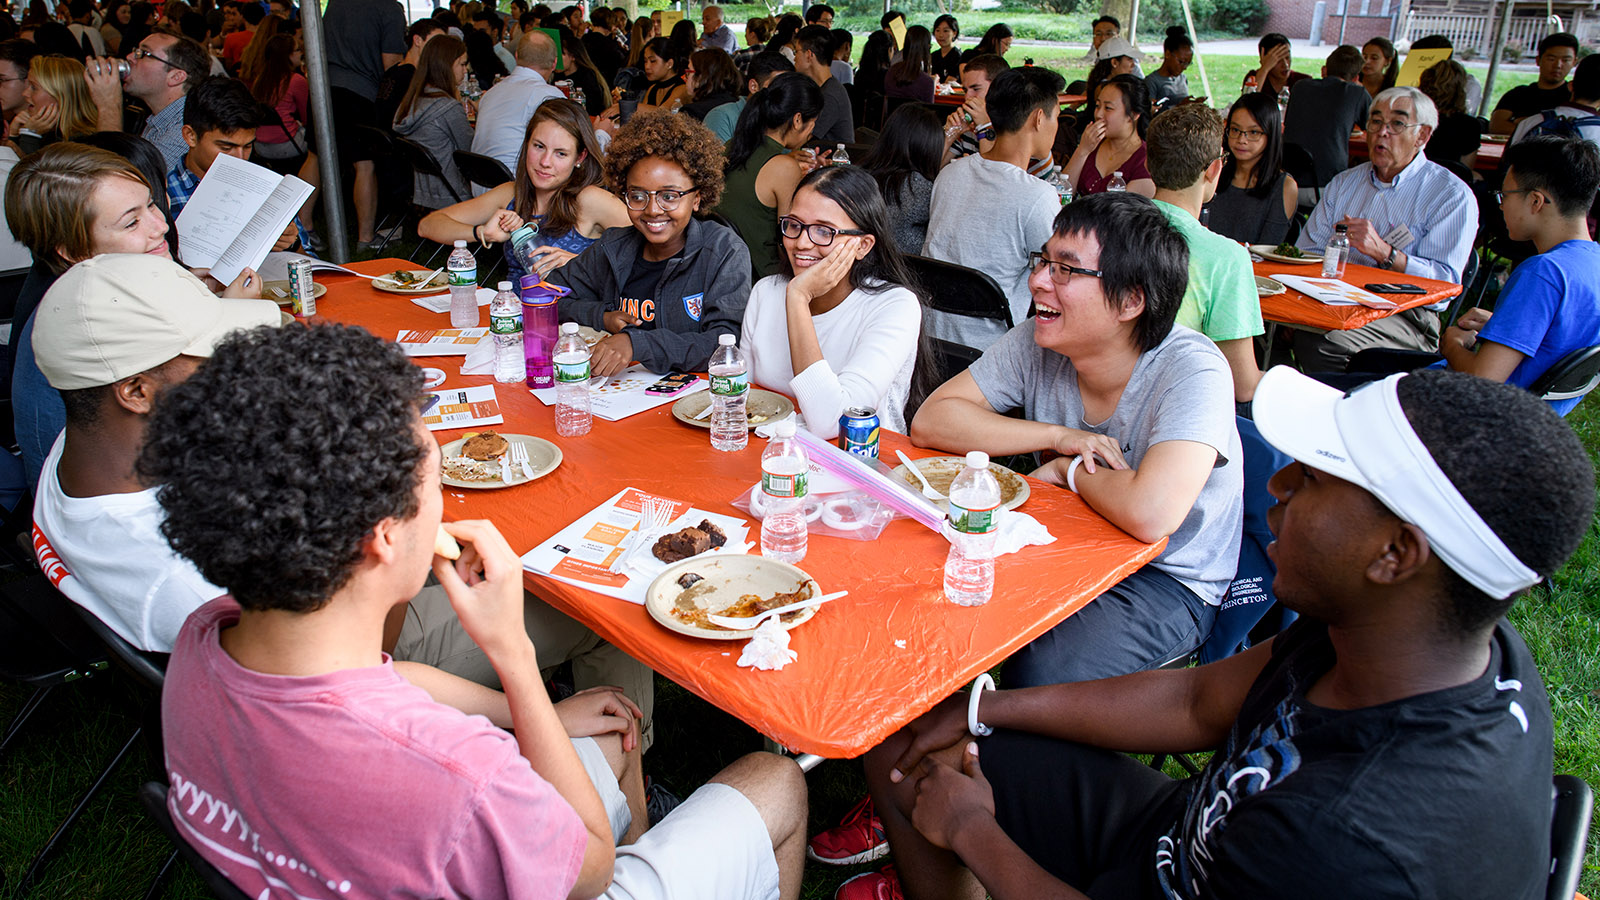 First-year undergraduates talk and eat at picnic table